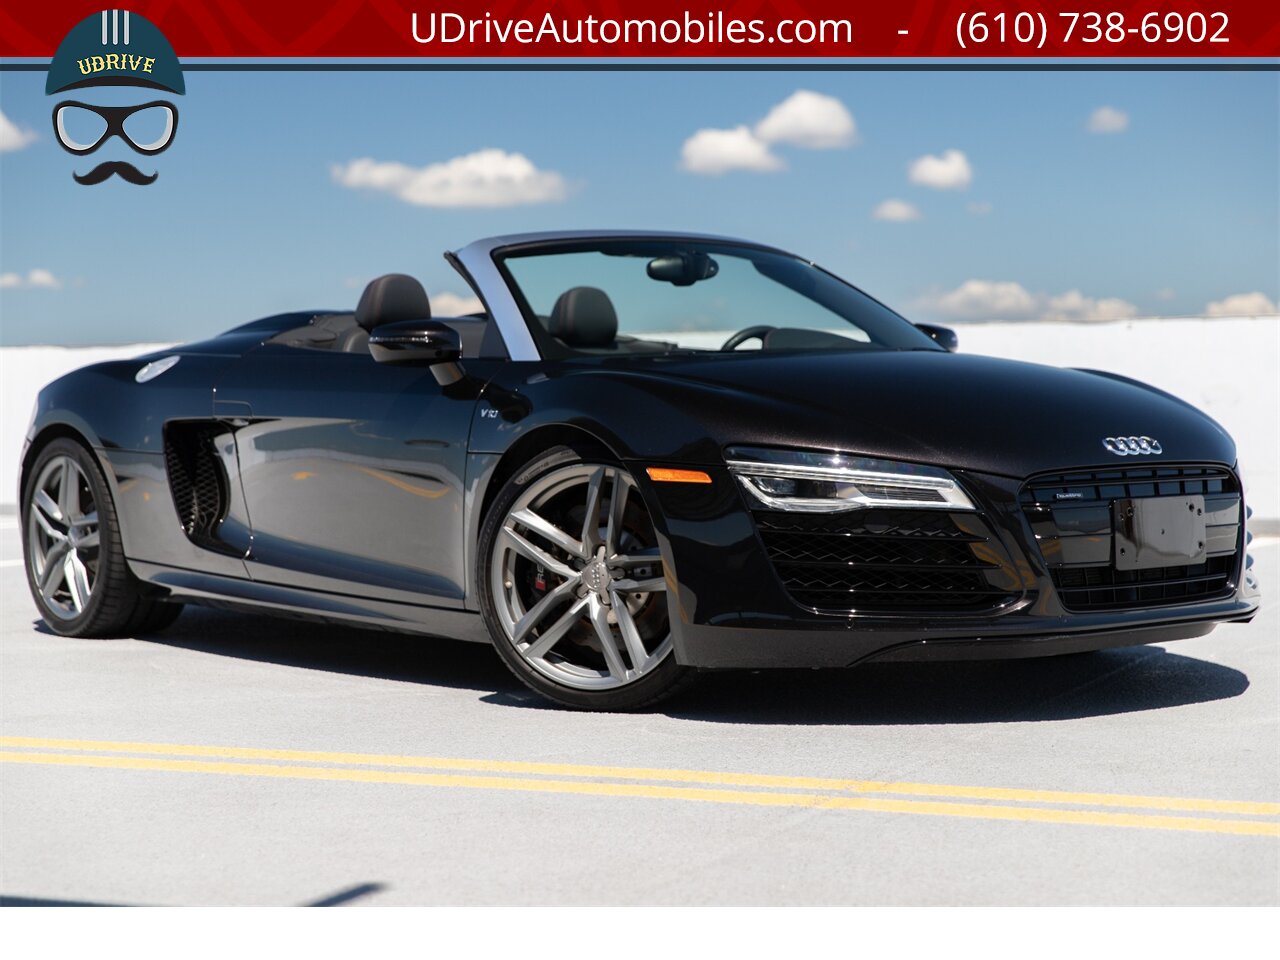 2014 Audi R8 5.2 V10 Quattro Spyder 6 Speed Manual 2k Miles  Extremely RARE 1 of 1 Color Combo - Photo 4 - West Chester, PA 19382